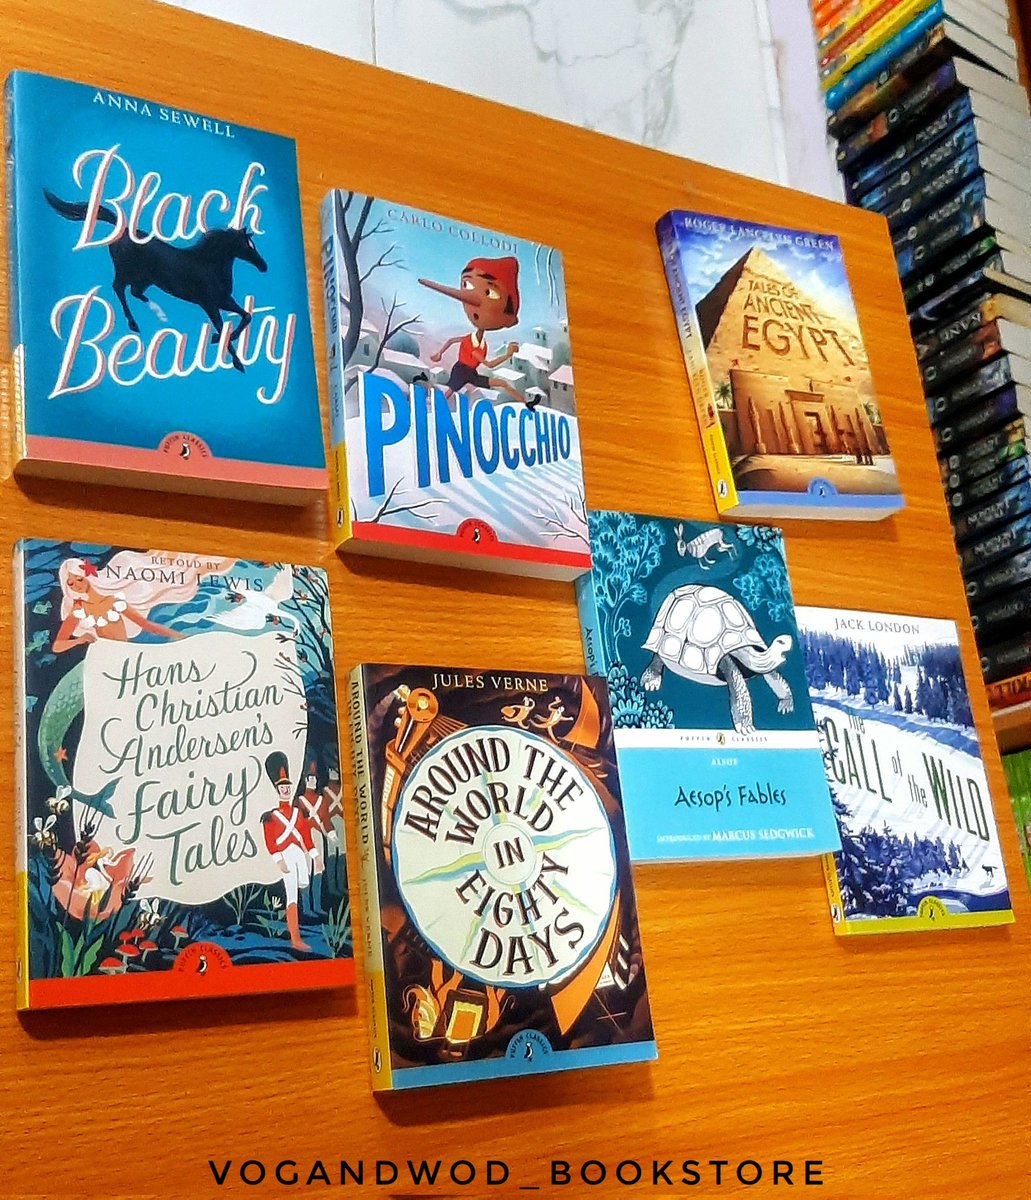 Tuesday reads for kiddies and young adults from penguin classics Black beauty Pinocchio Tales of ancient Egypt Hans Christian Anderson's fairy tales Around the world in 80 days Aesop's fables Call of the wild and more.......